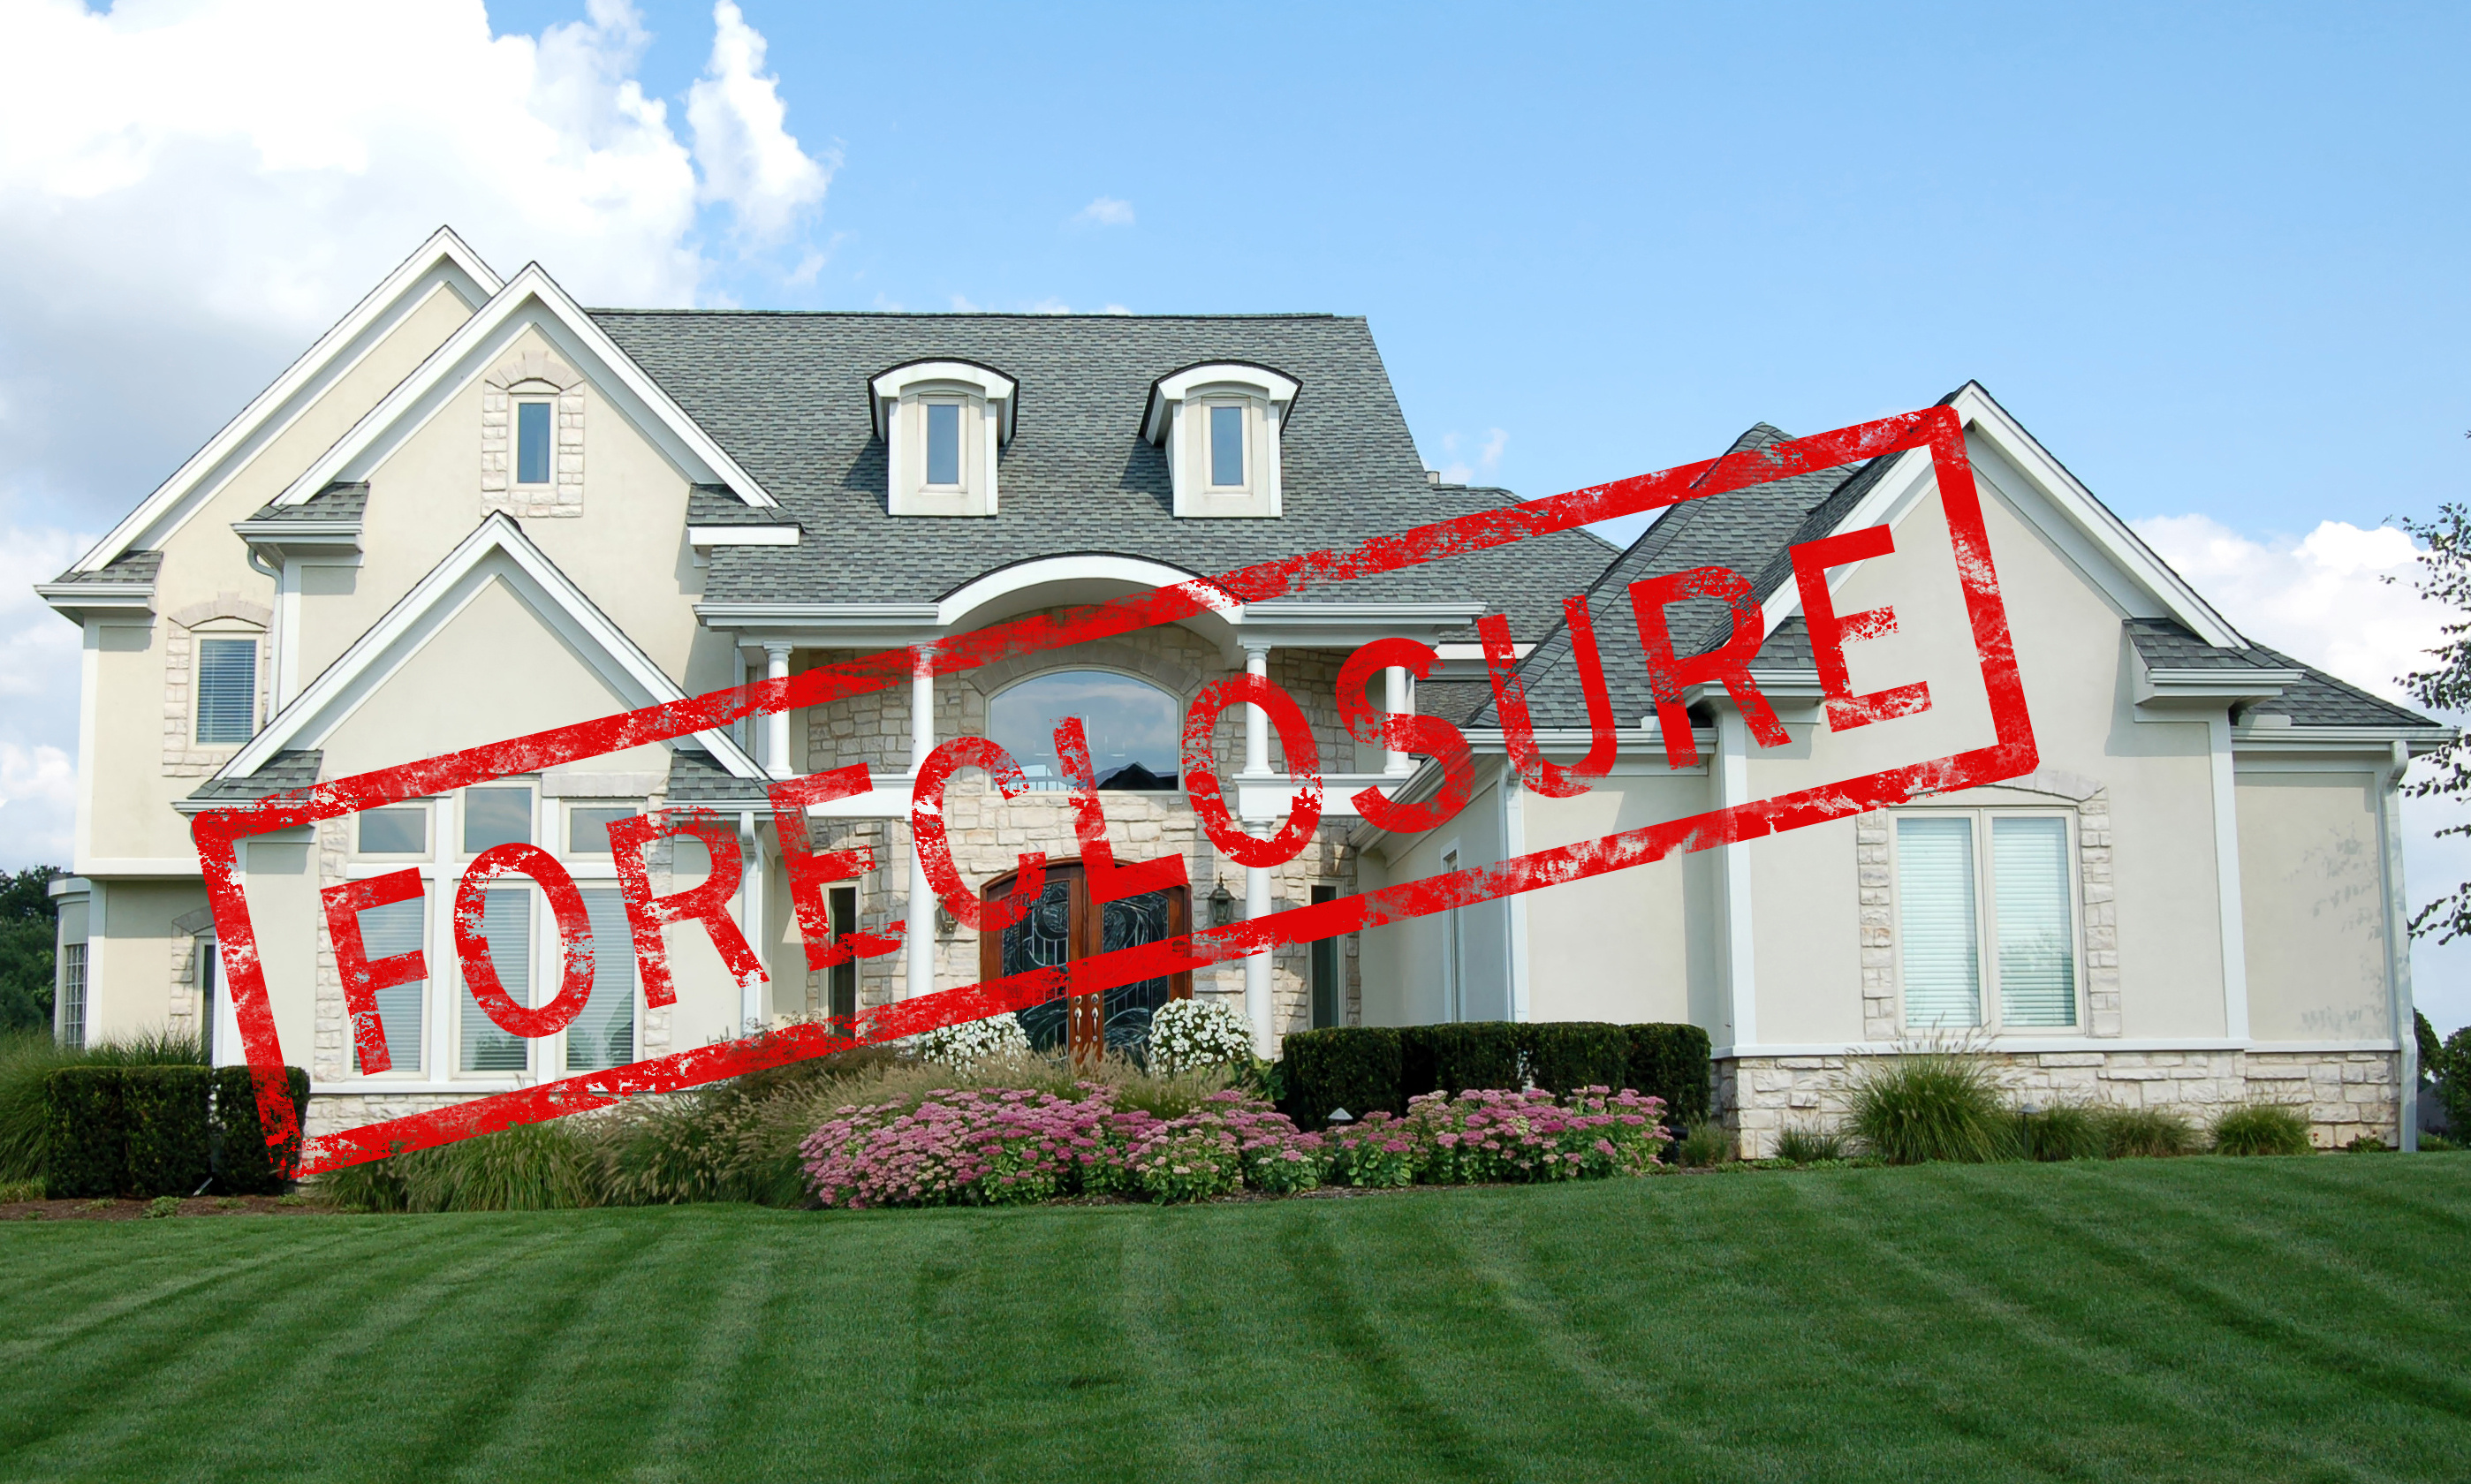 Call Appraisal-One to discuss appraisals pertaining to Orange foreclosures